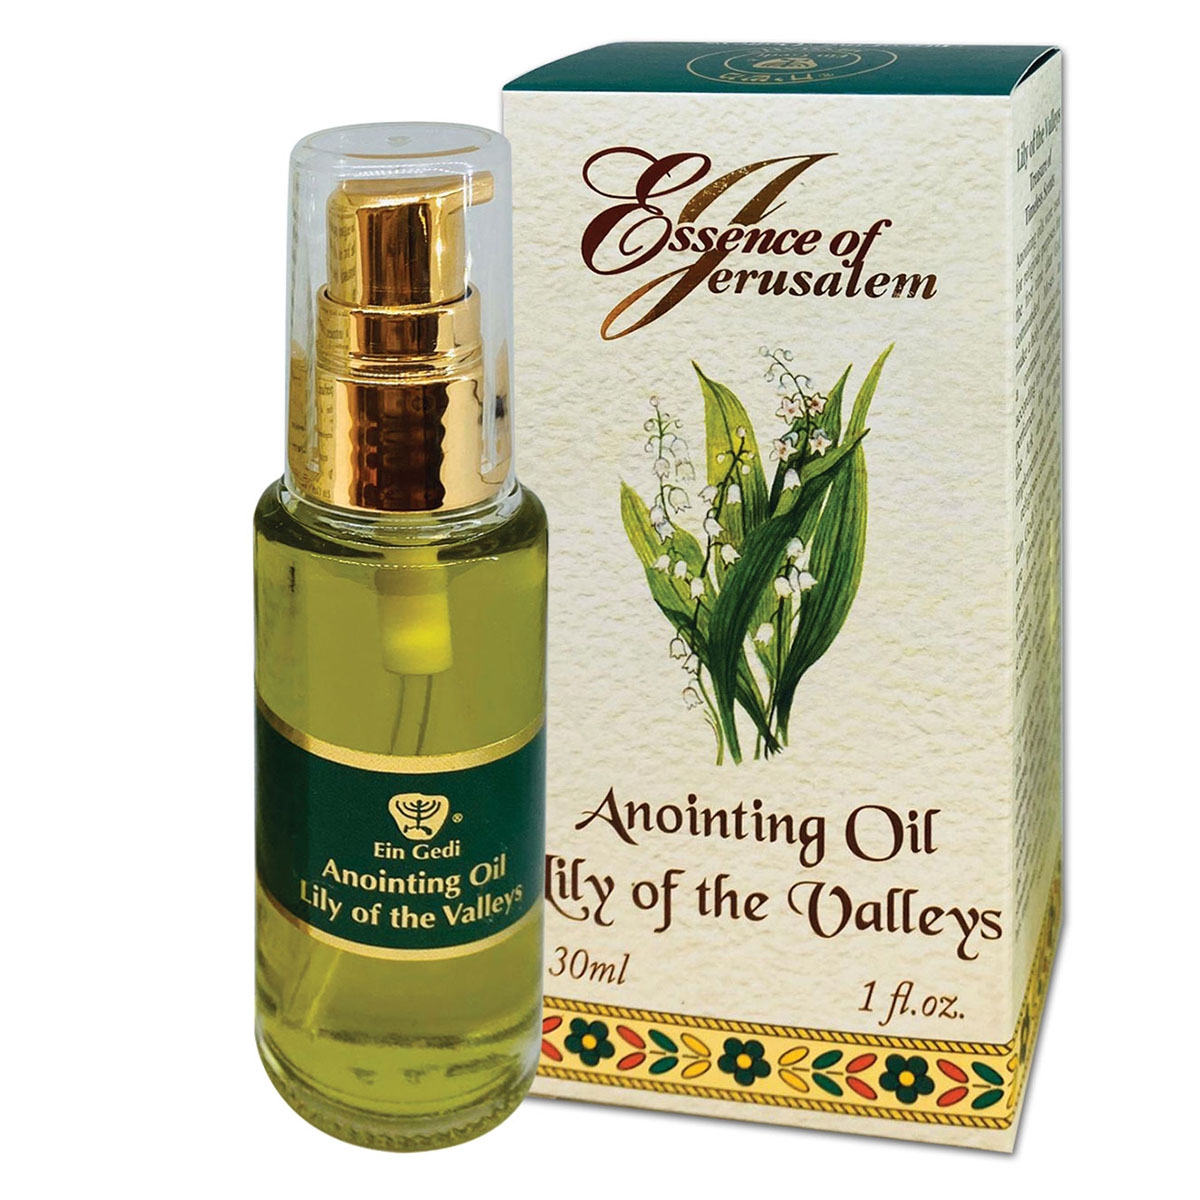 Ein Gedi Essence of Jerusalem Anointing Oil – Lily of the Valleys (30 ml) - 1